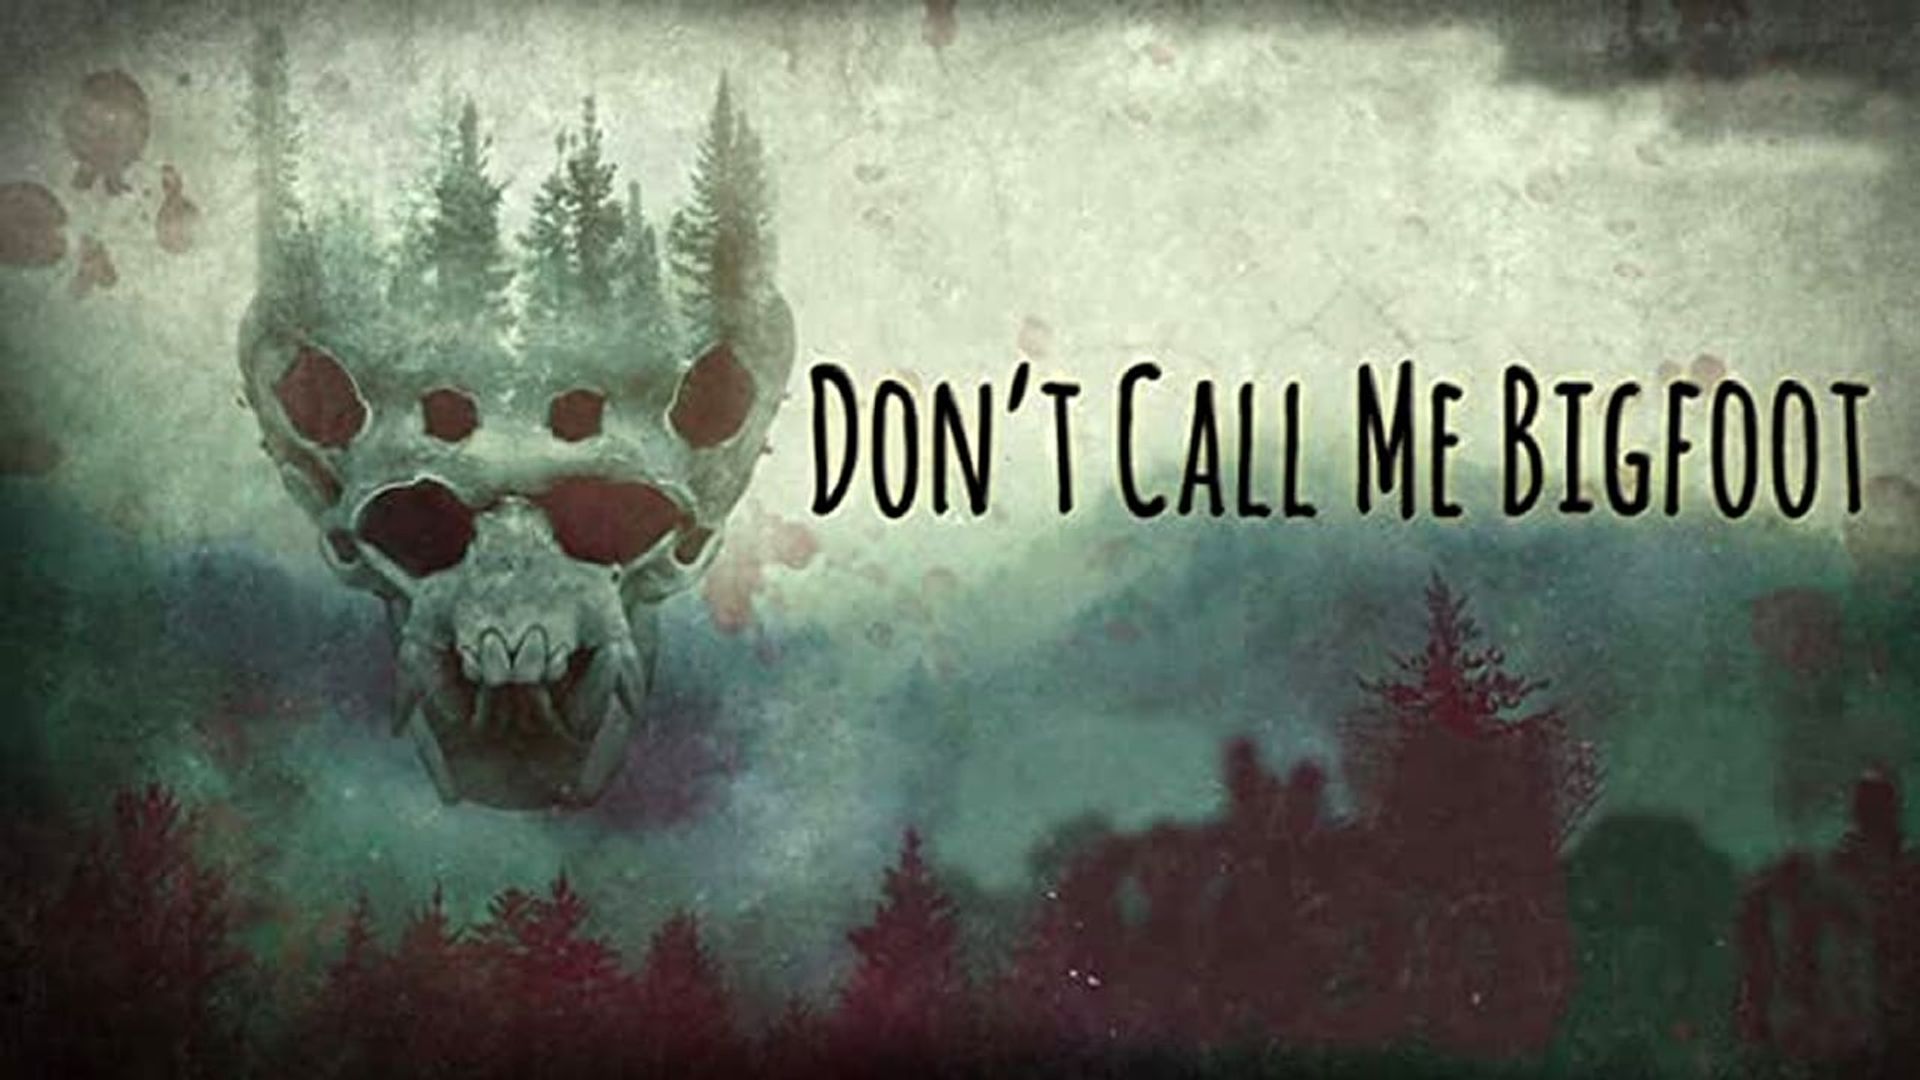 Don't Call Me Bigfoot background